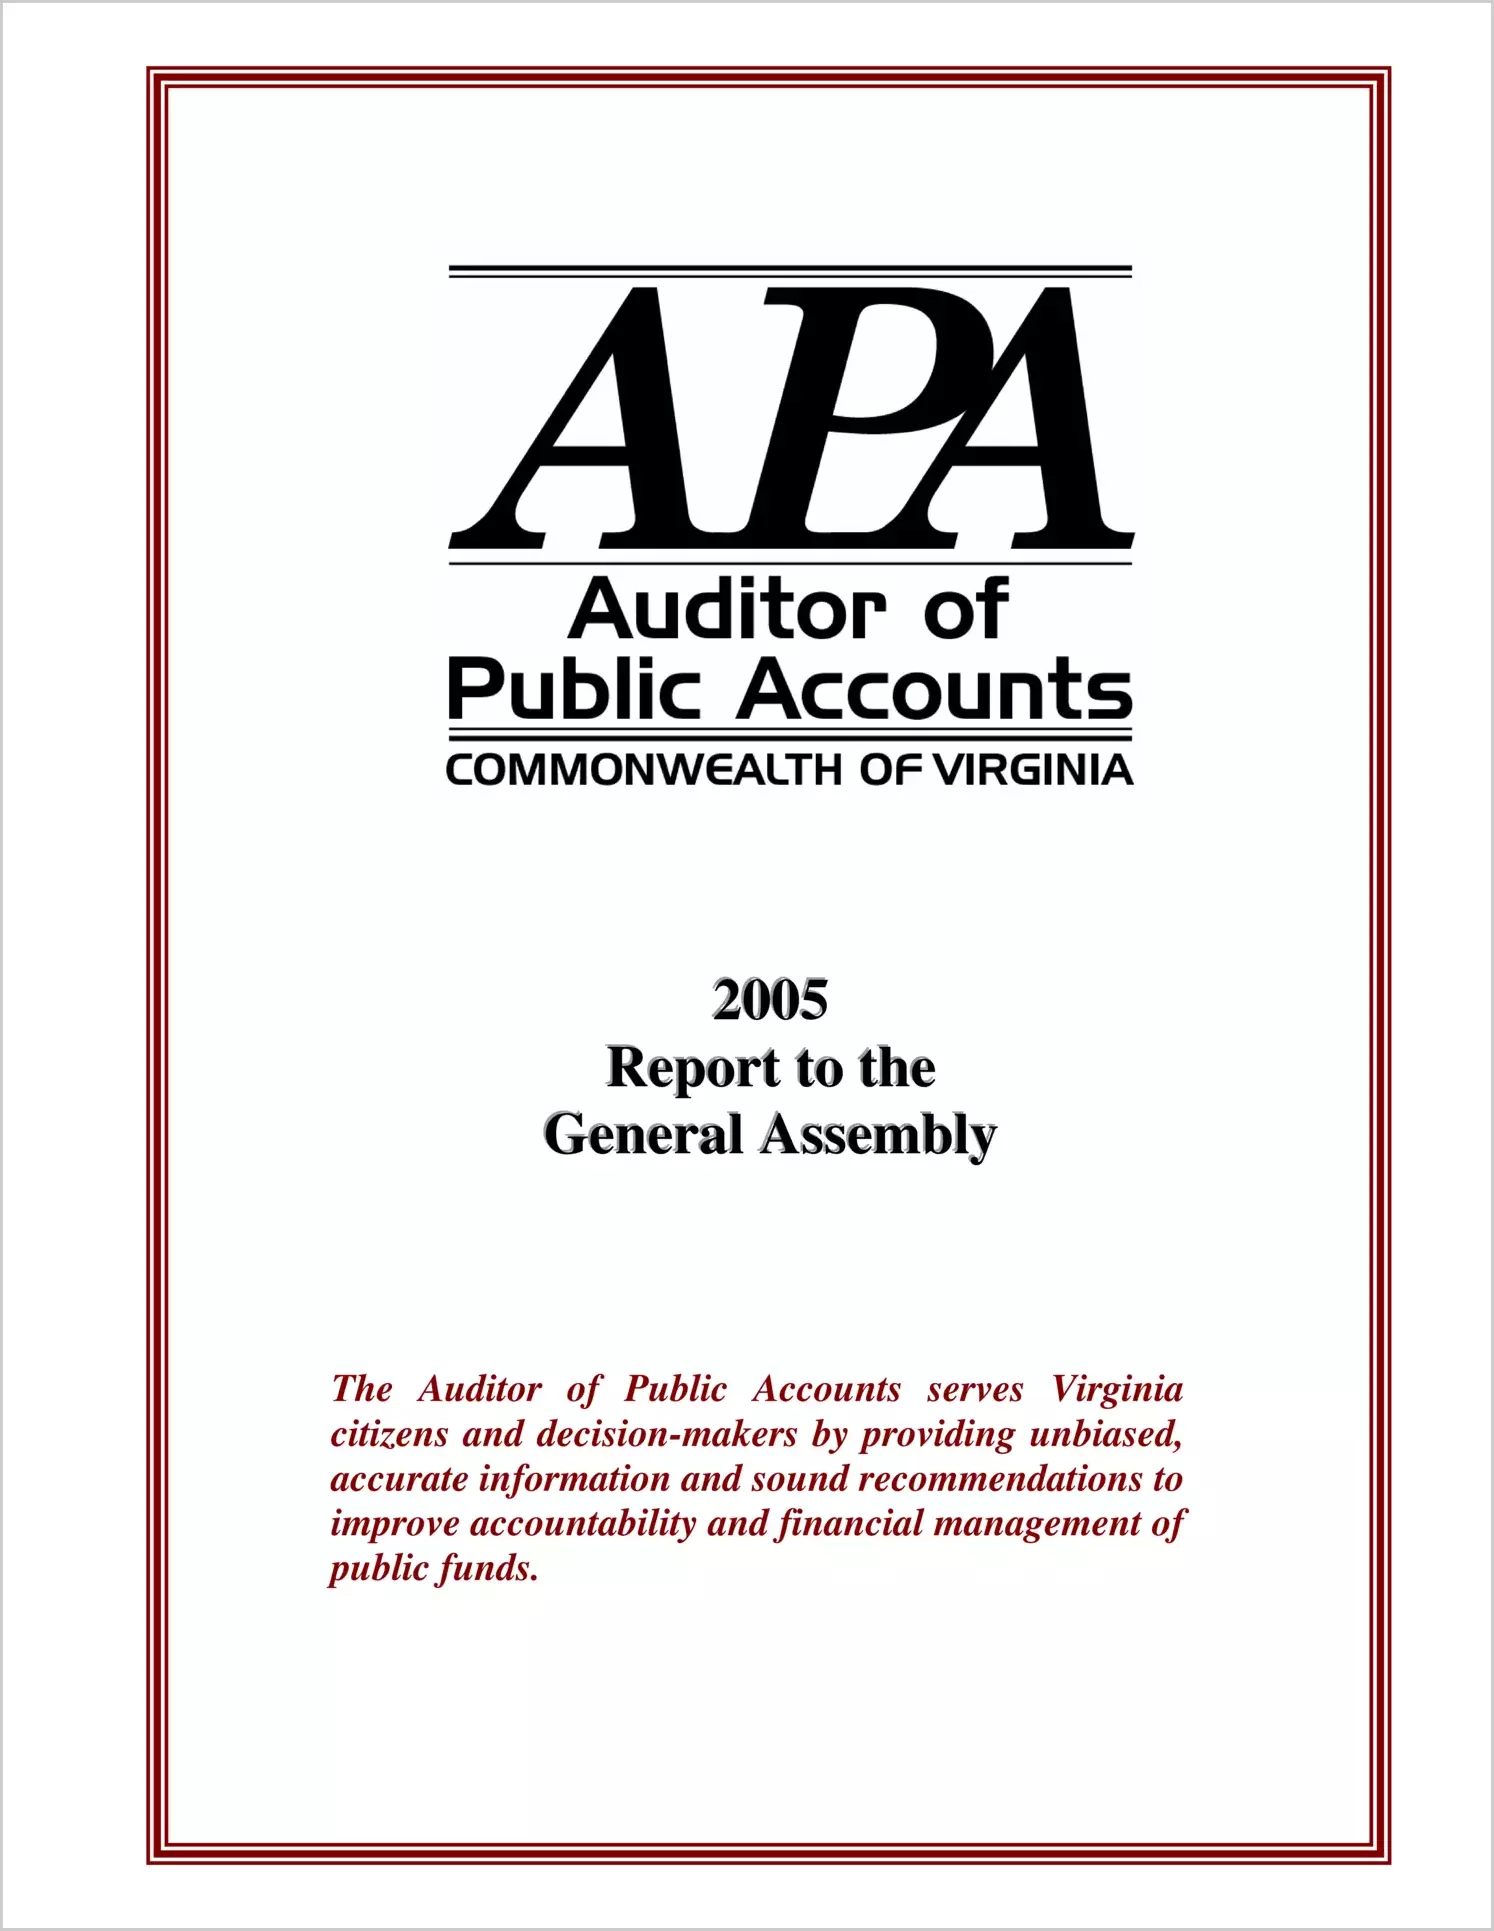 Auditor of Public Accounts 2005 Report to the General Assembly